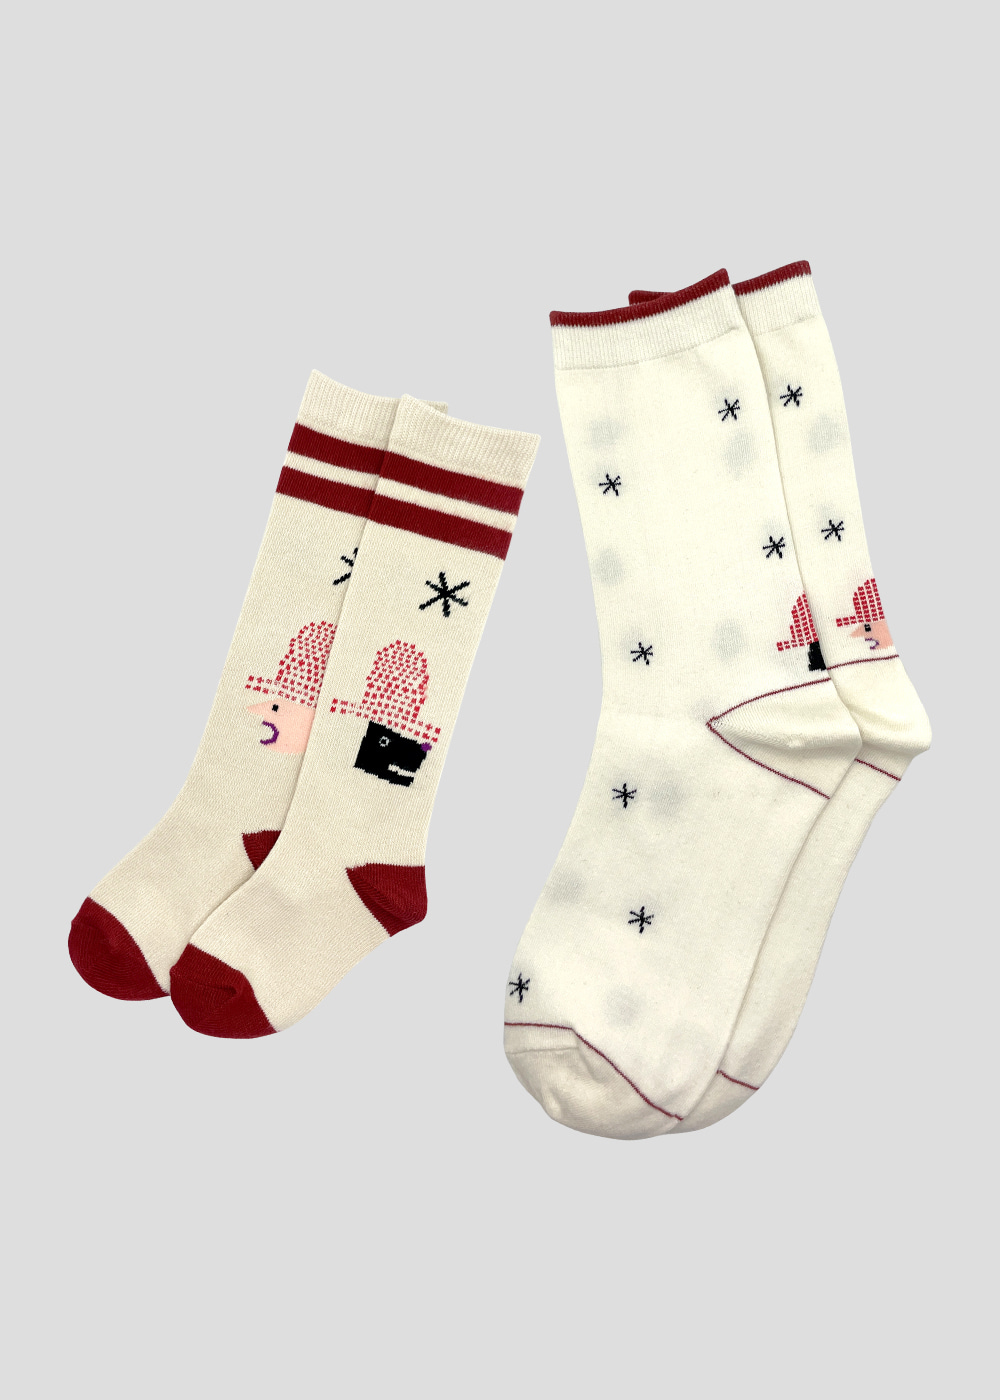 Family Socks - Daily Discussion (Ivory)